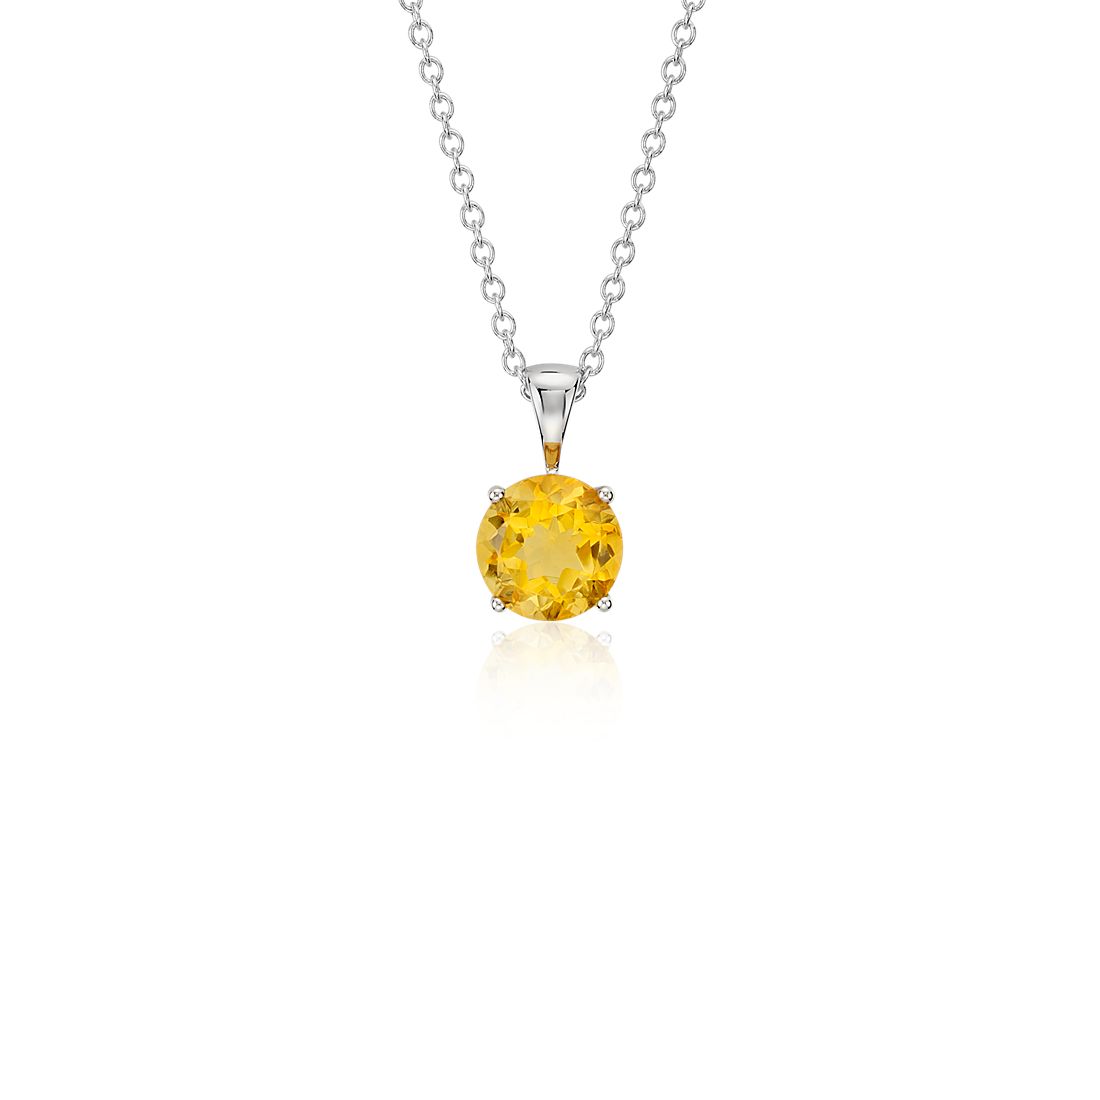 ALARRI 0.7 CTW 14K Solid White Gold Seeker Of Silence Citrine Necklace with 22 Inch Chain Length 